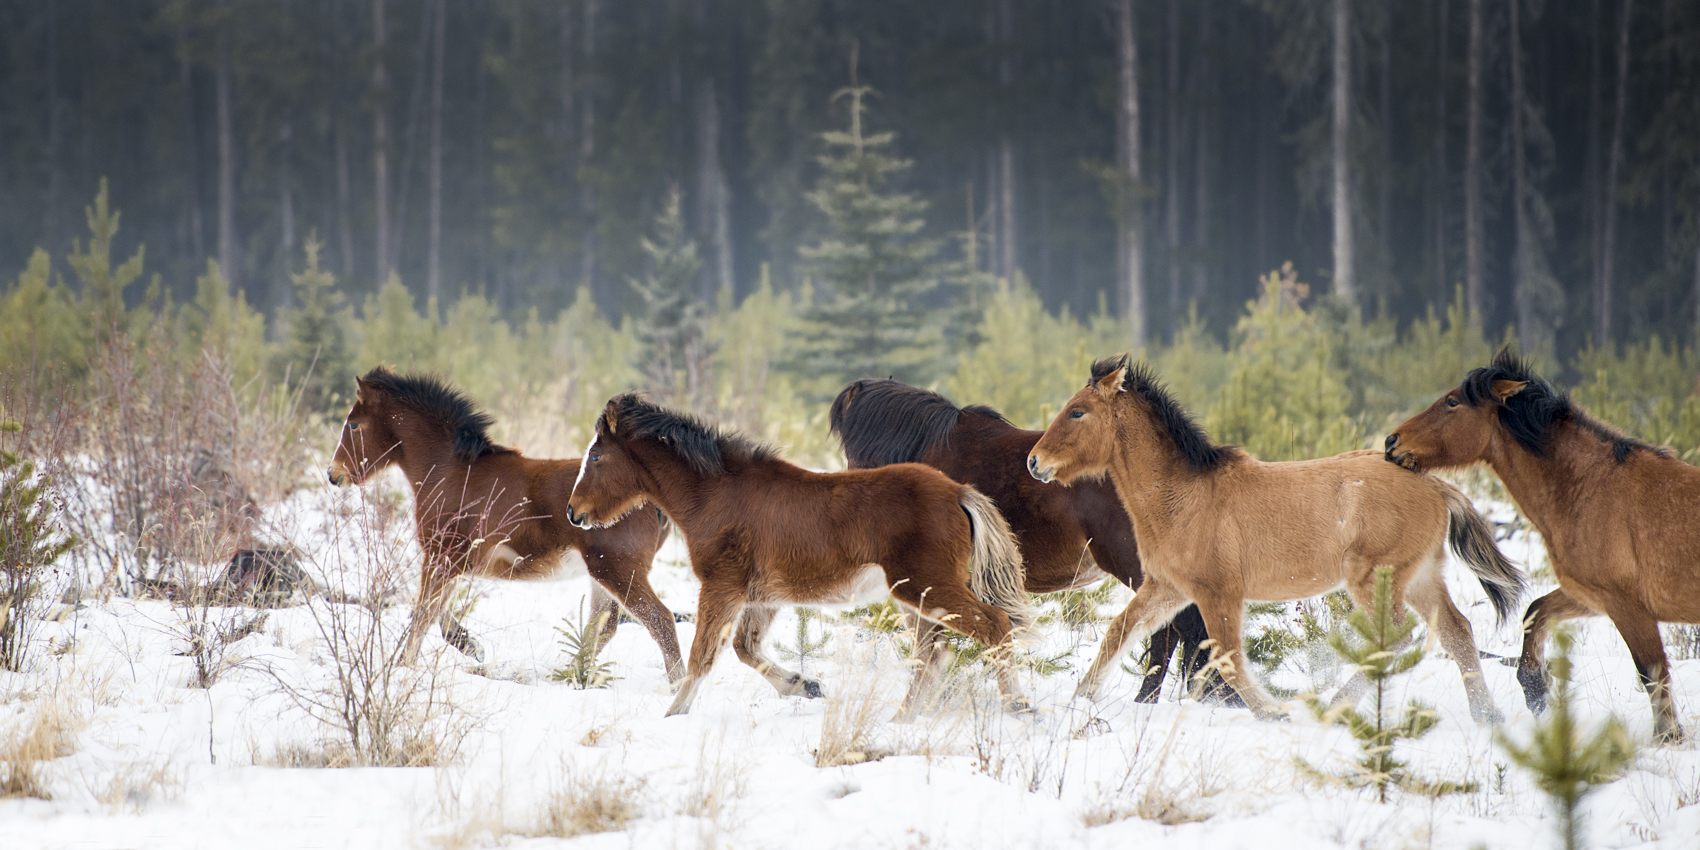 2018: The Year to See Alberta's Wild Horses - Nature Canada